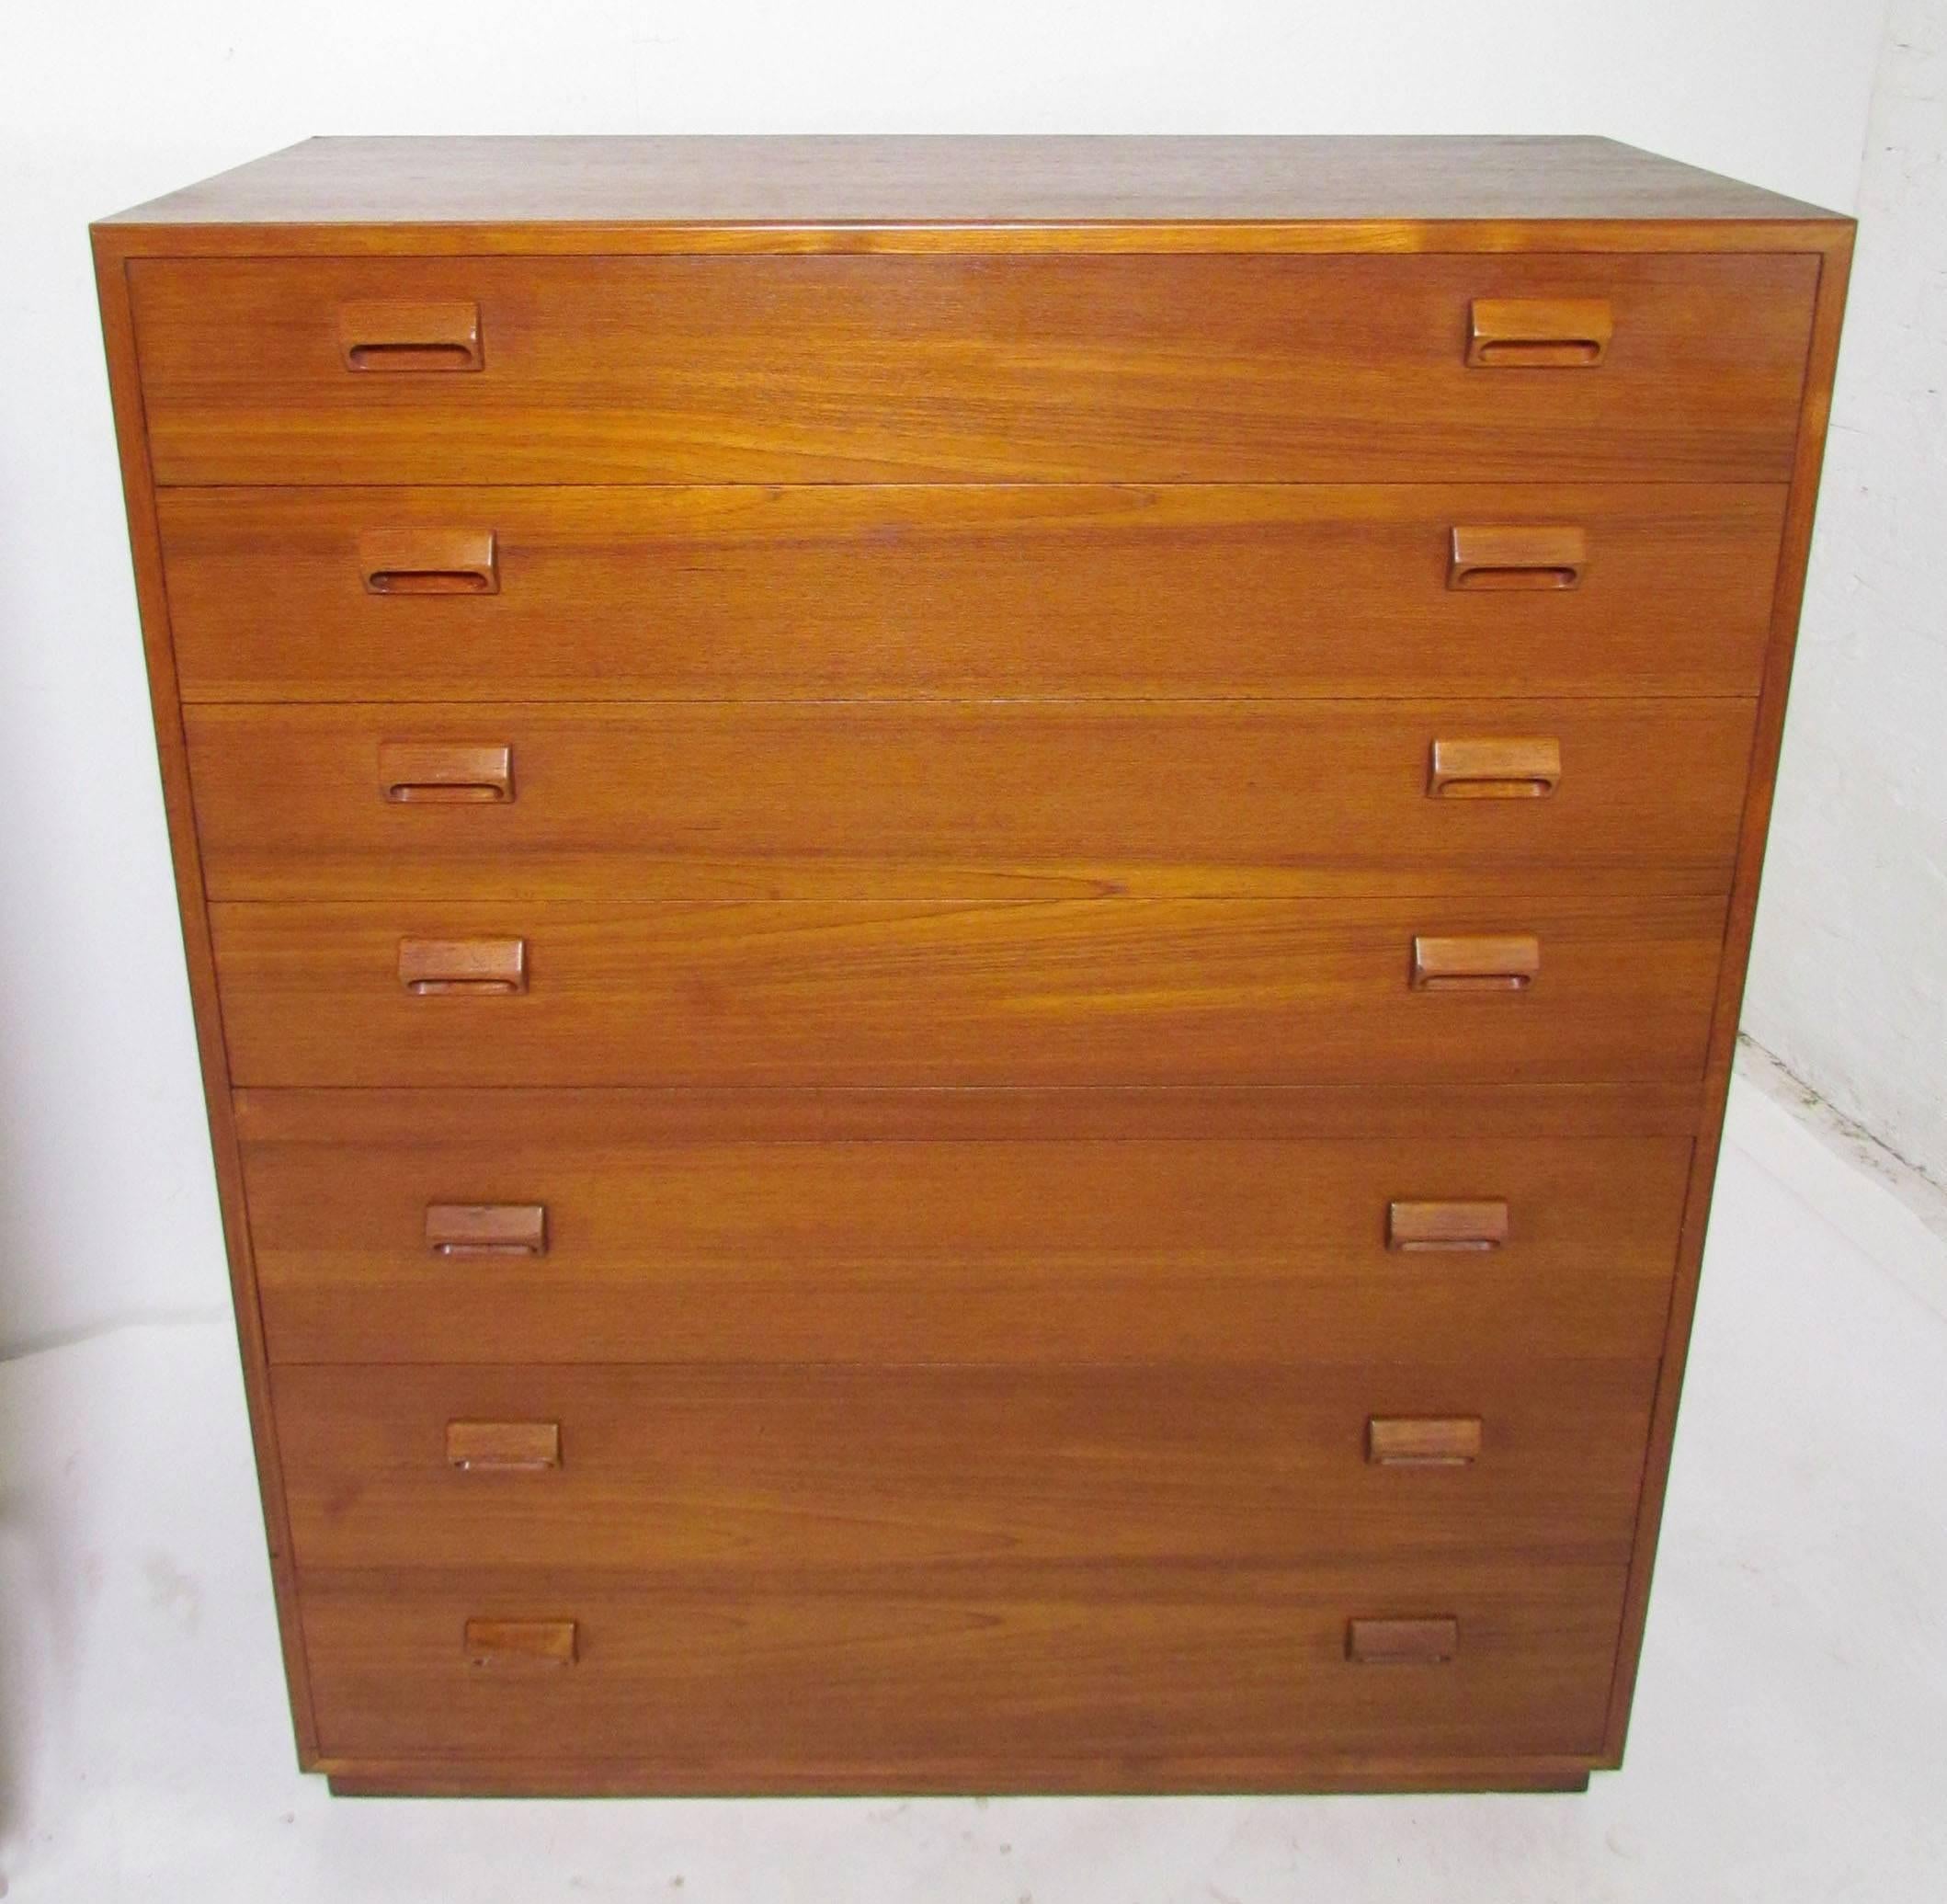 Danish teak highboy seven-drawer chest of drawers by Børge Mogensen for Soborg Mobelfabrik, circa 1960s. Rich patina and Mogensen's signature carved block pulls.

Please note we currently have two of these chests, both from the same estate, but